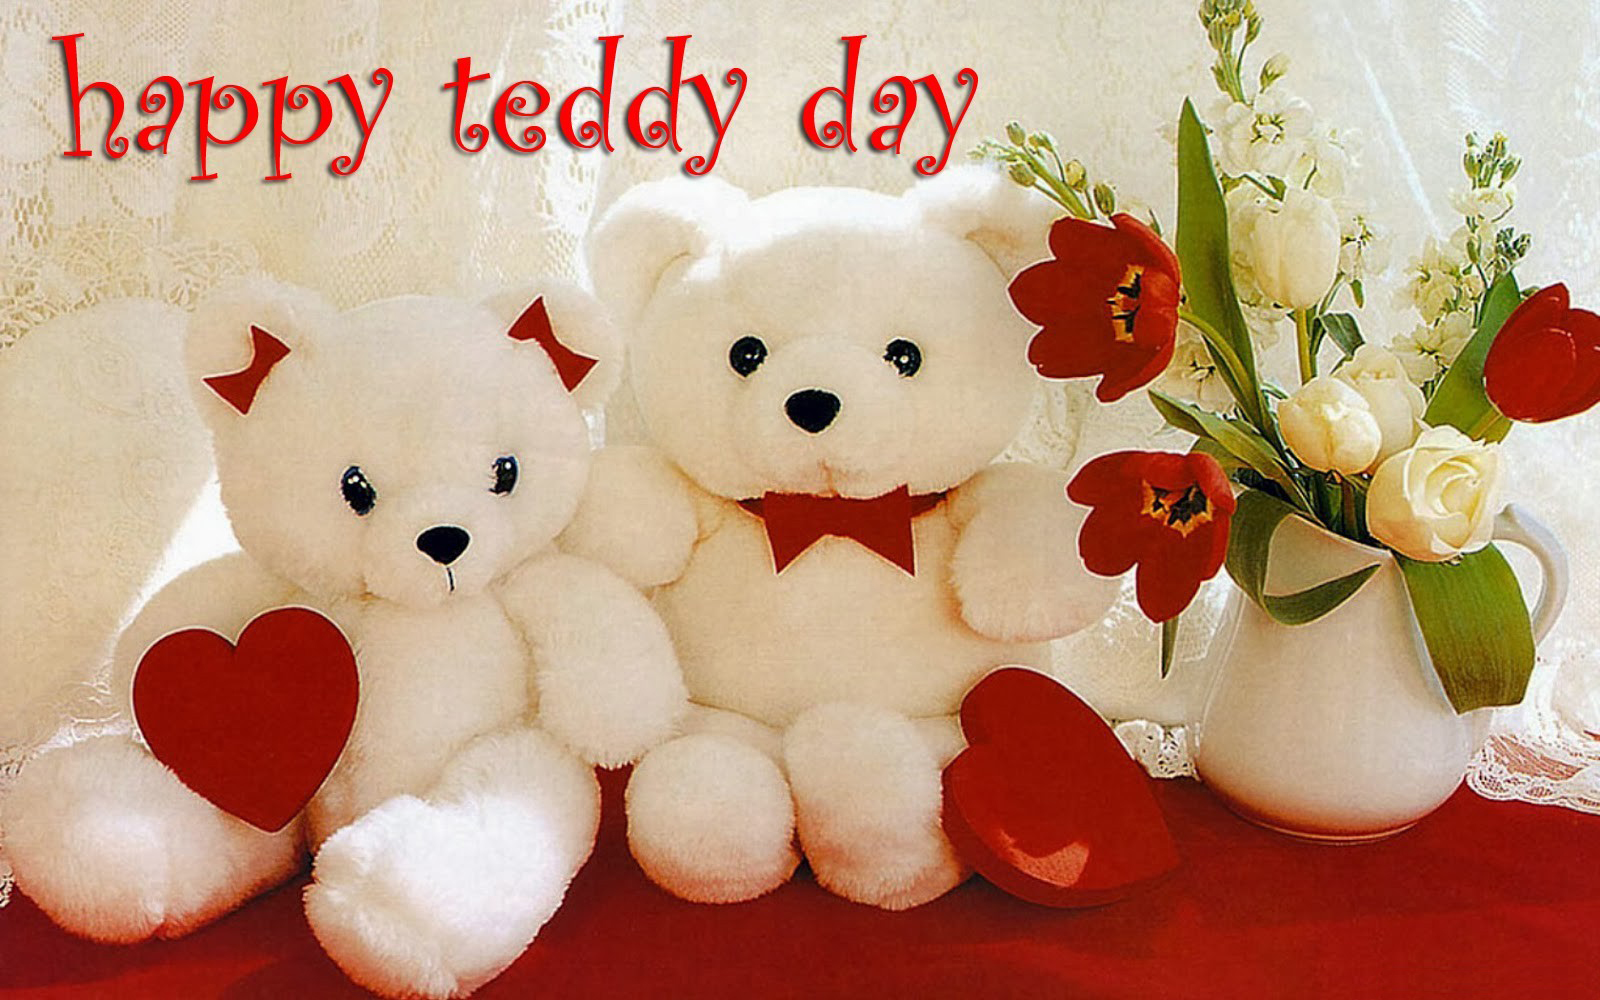 Happy Teddy Day HD 3d Image Wallpaper Pictures